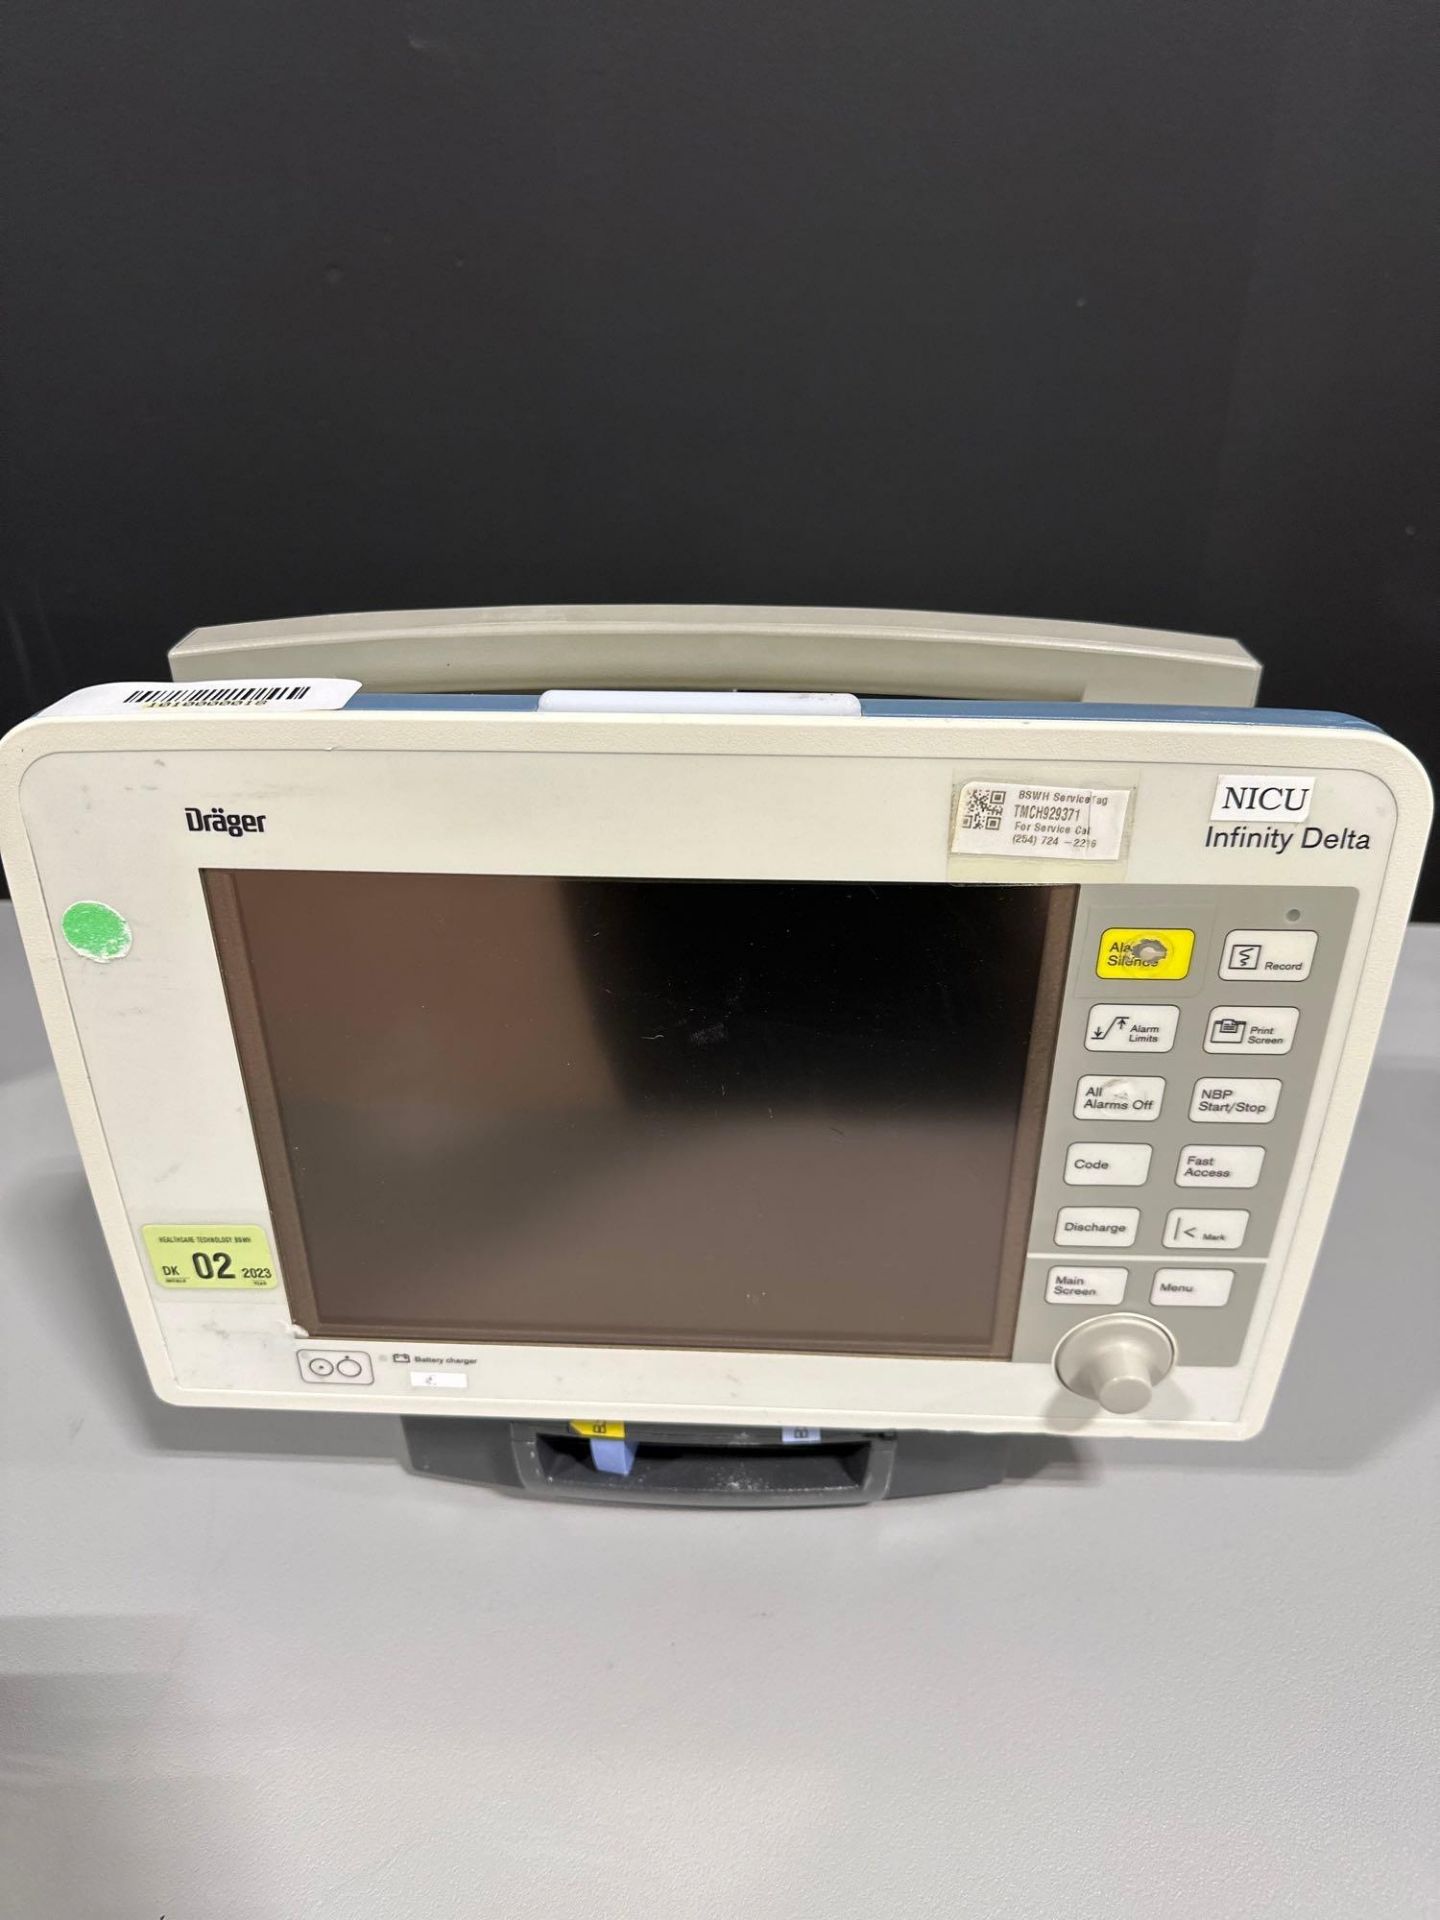 DRAGER INFINITY DELTA PATIENT MONITOR